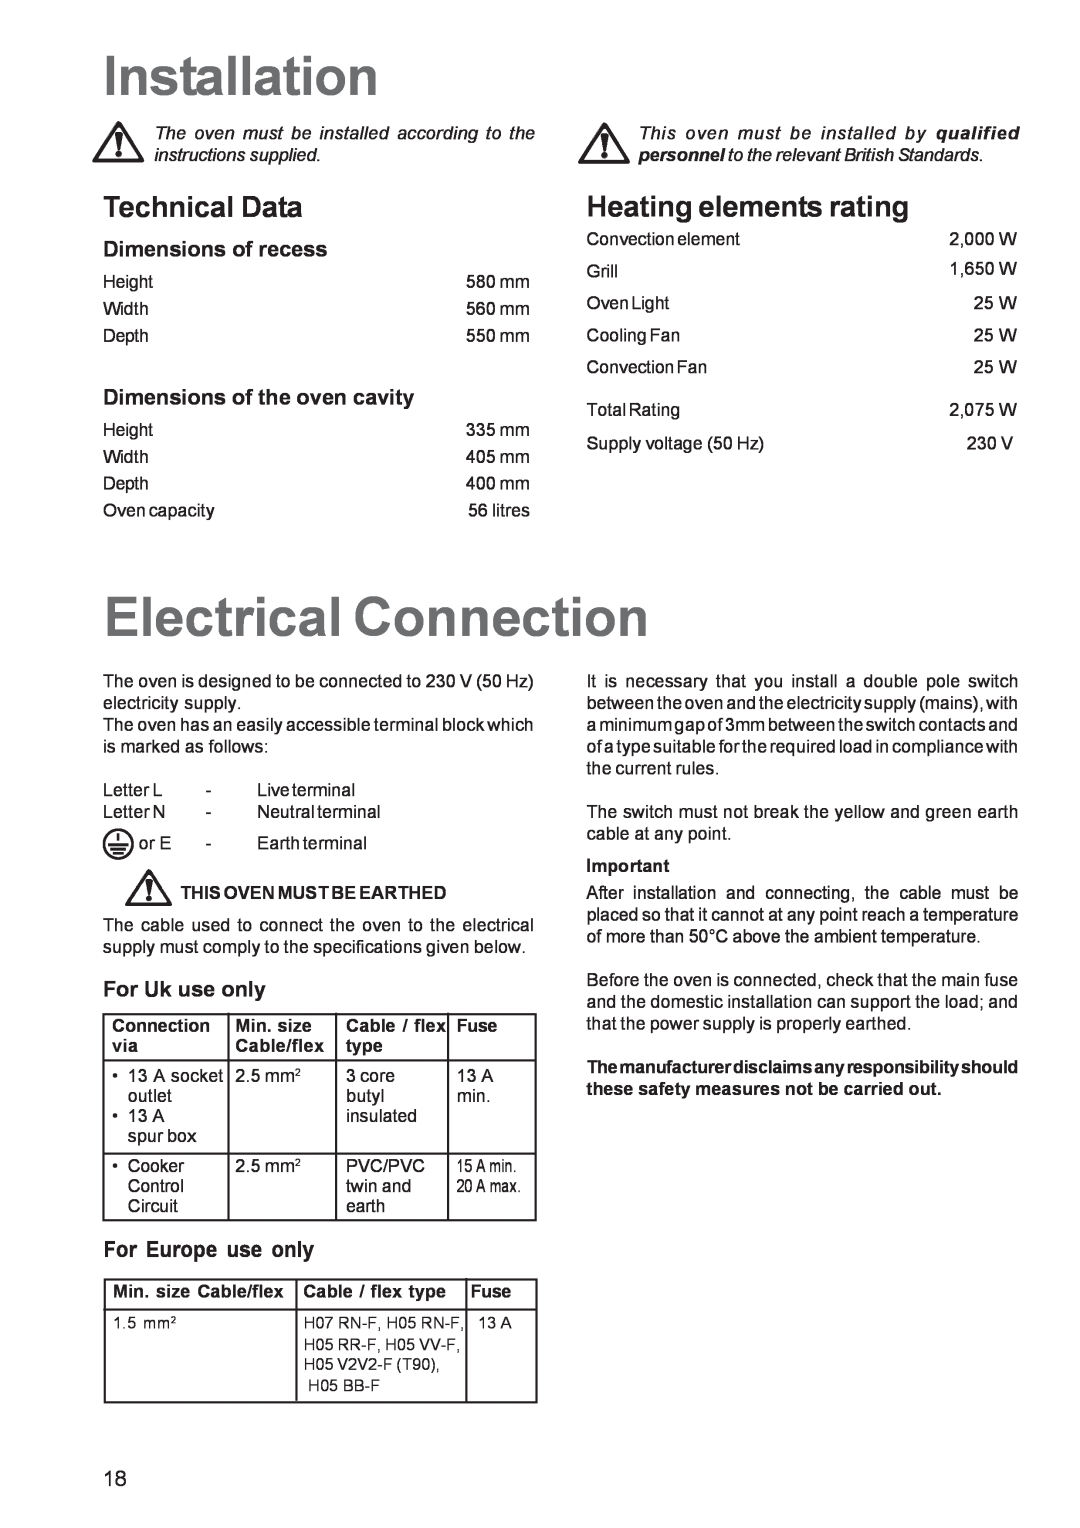 Zanussi ZBF 360 Installation, Electrical Connection, Technical Data, Heating elements rating, Dimensions of recess, Fuse 